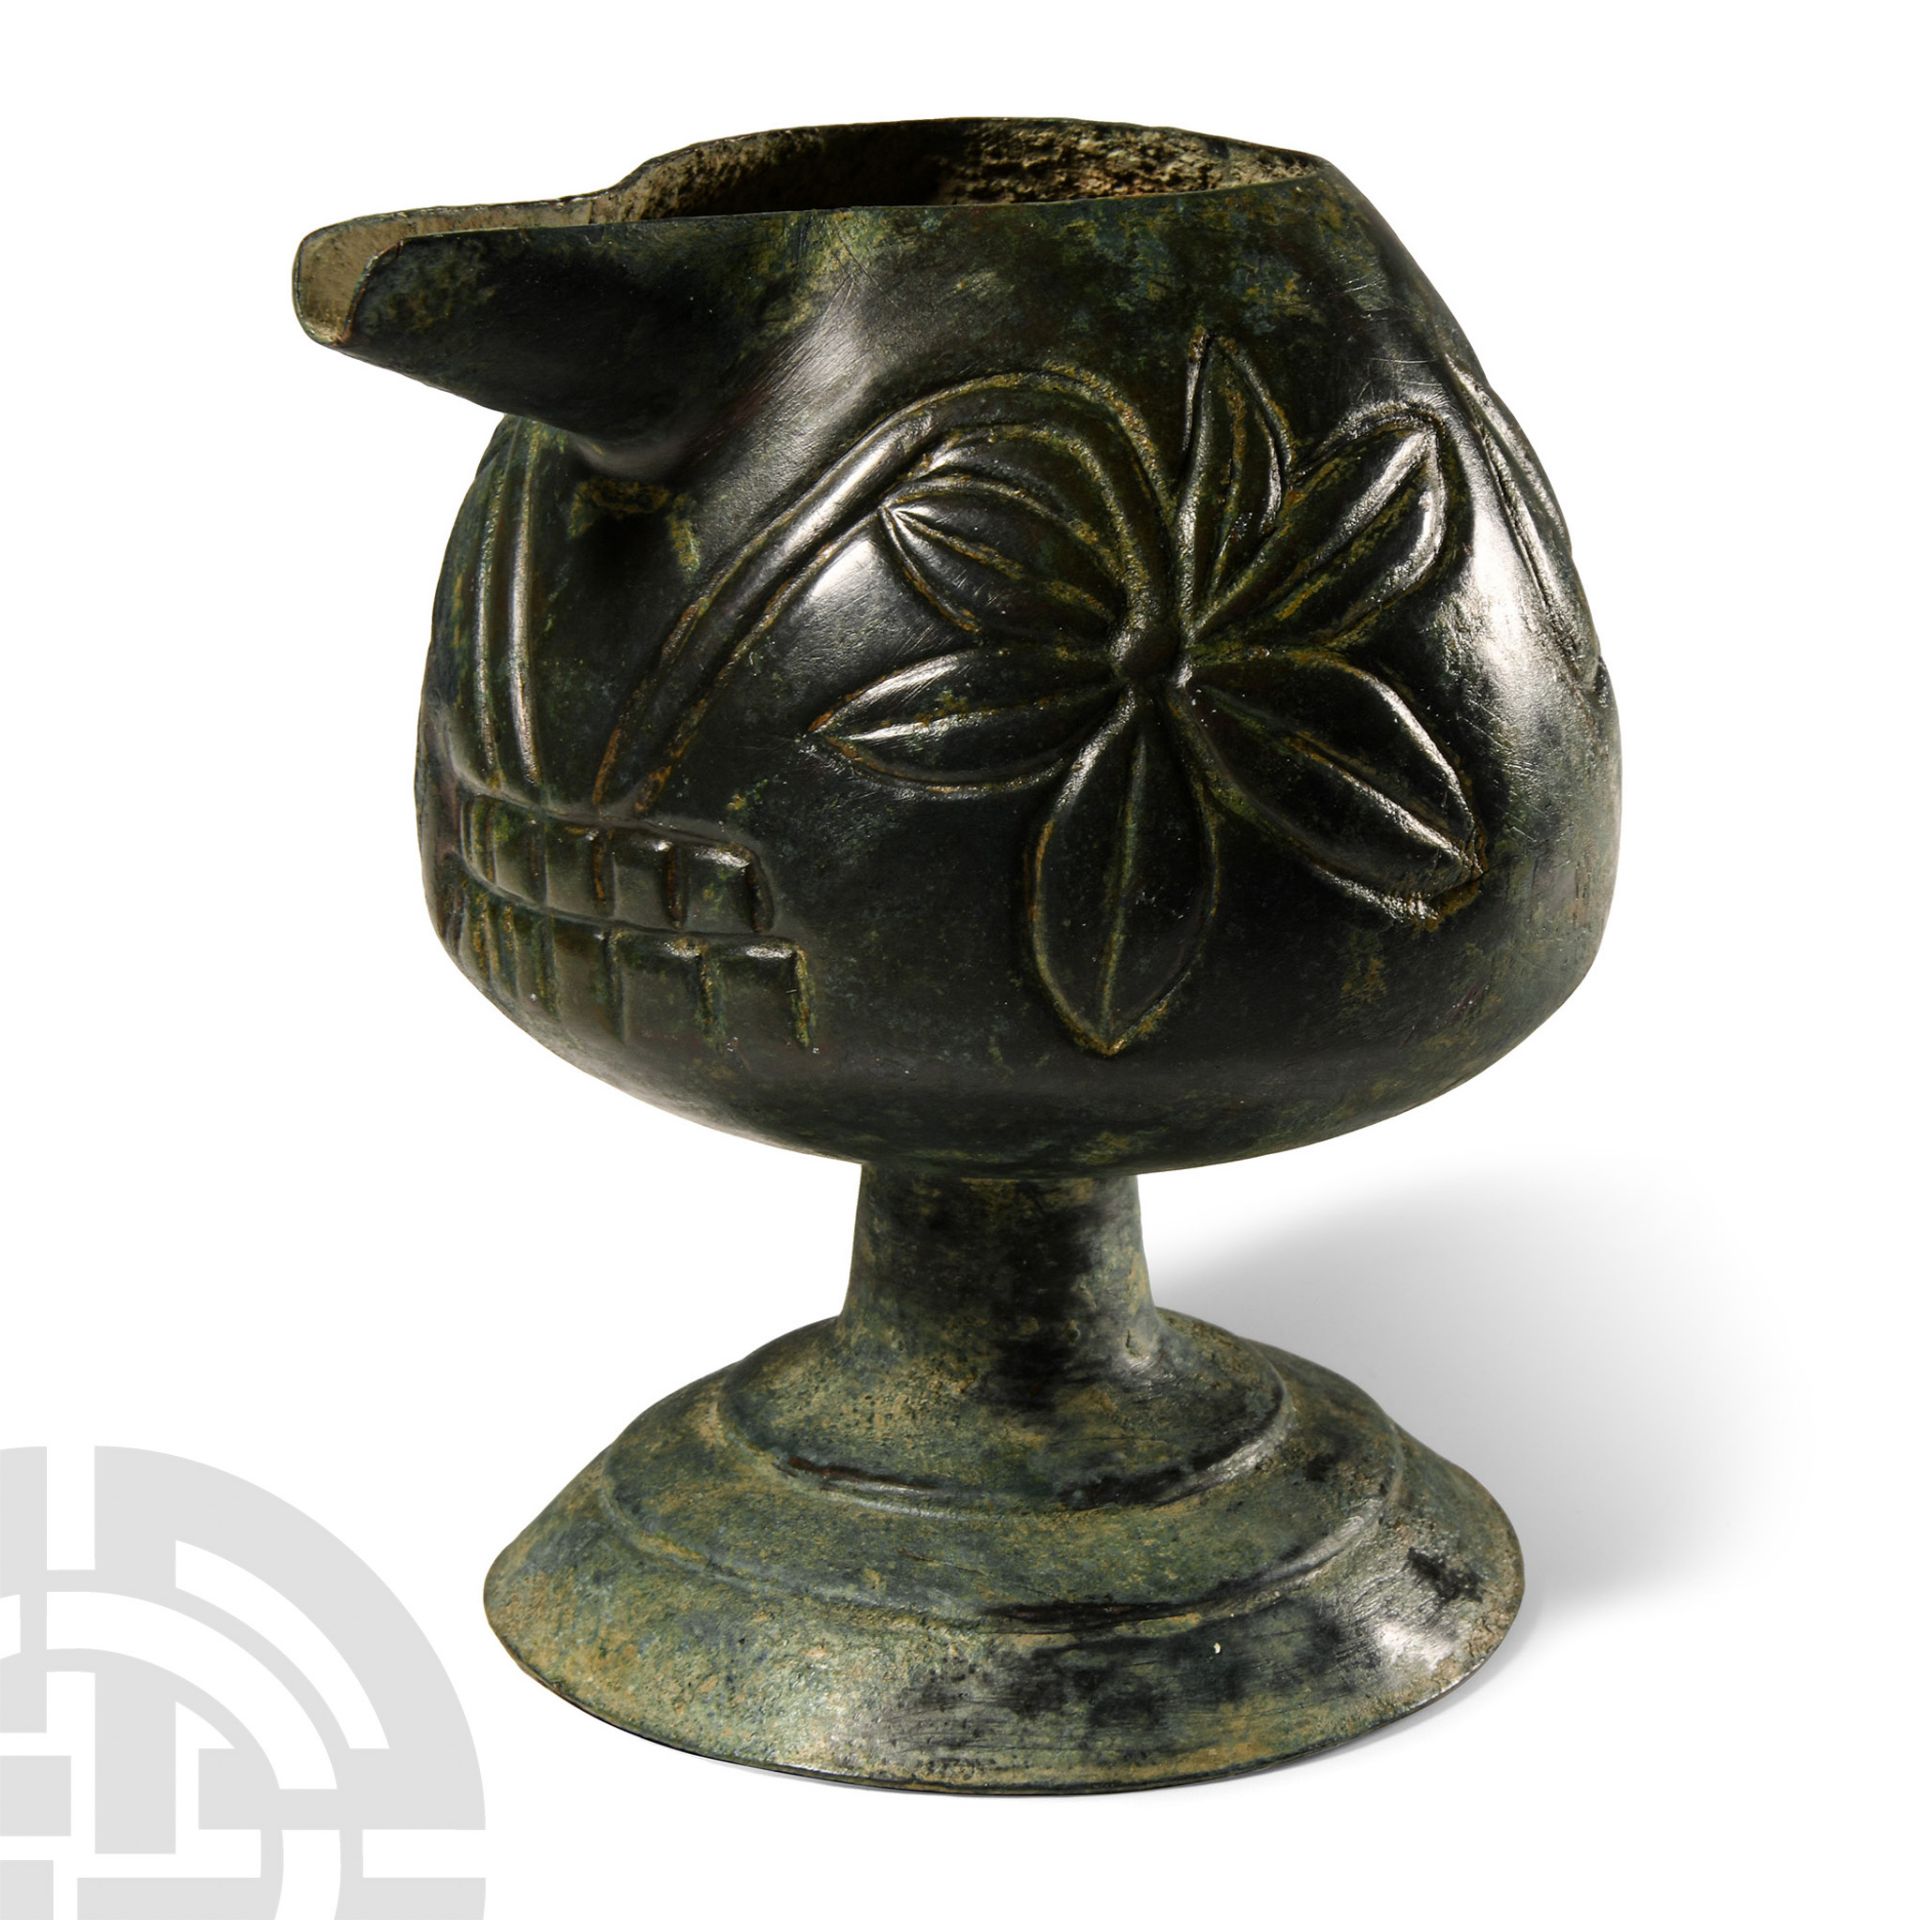 Elamite Spouted Vessel with Flowers - Image 2 of 2